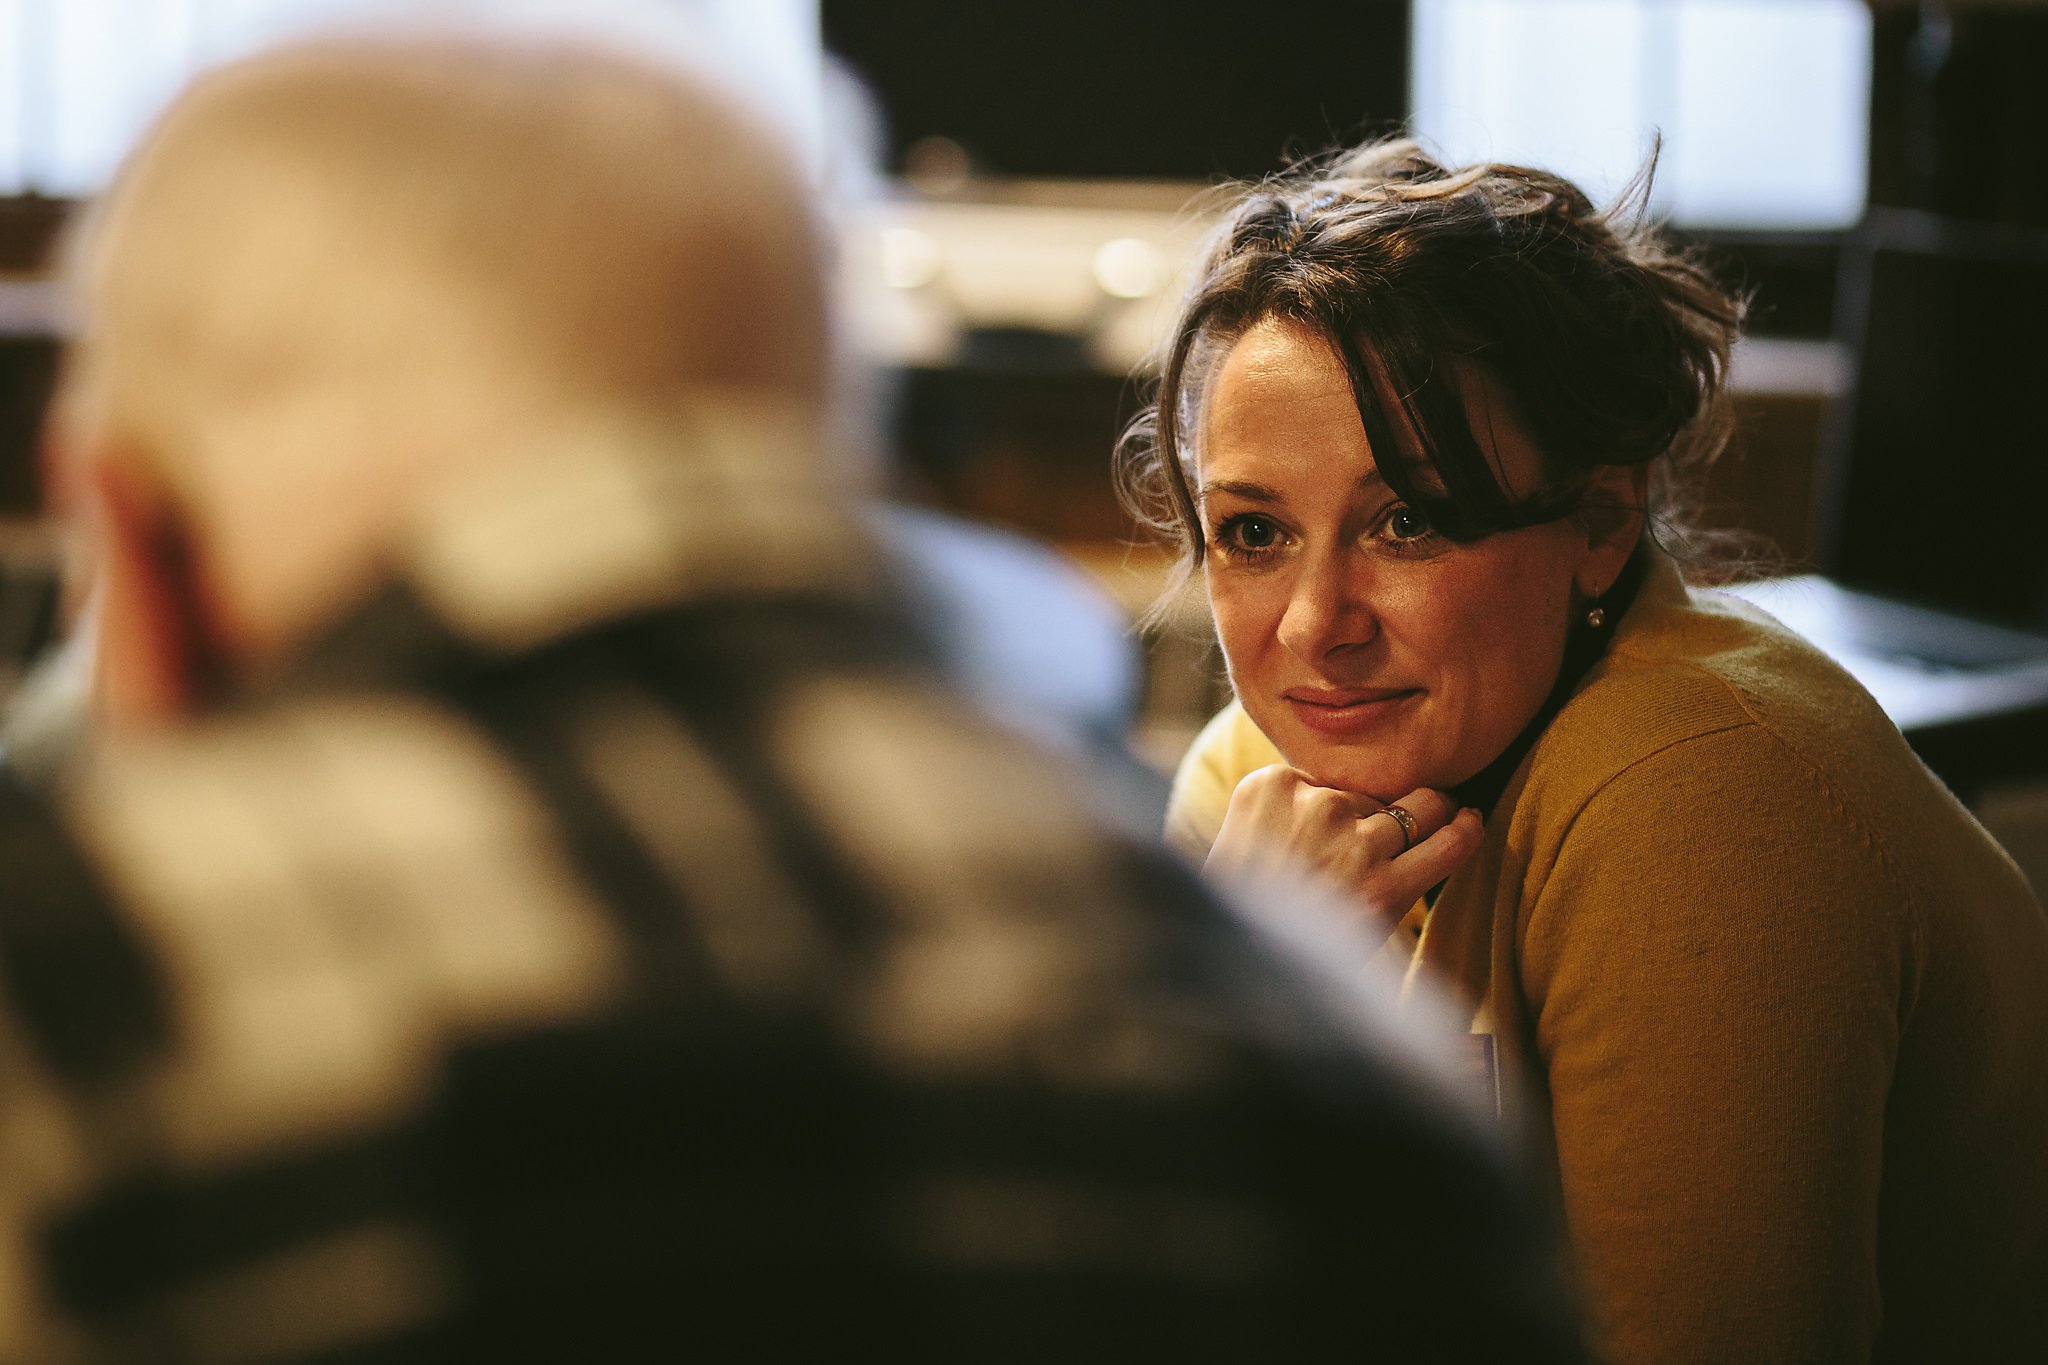 A woman looking on as a group discussion takes place.